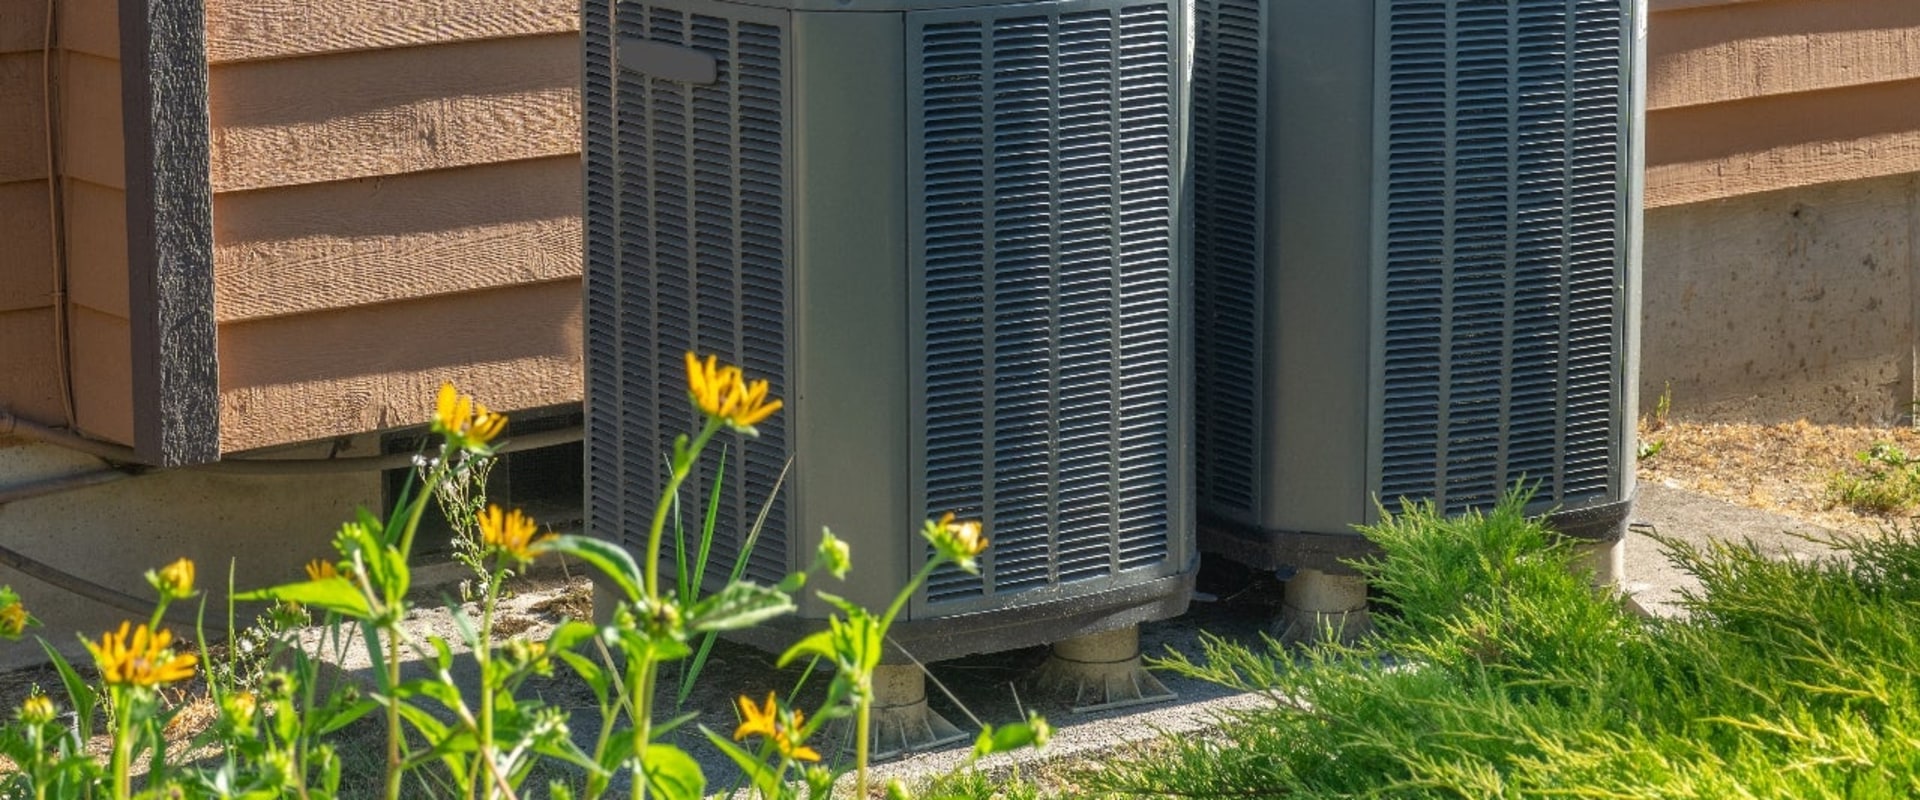 What is the cheapest type of air conditioning system?